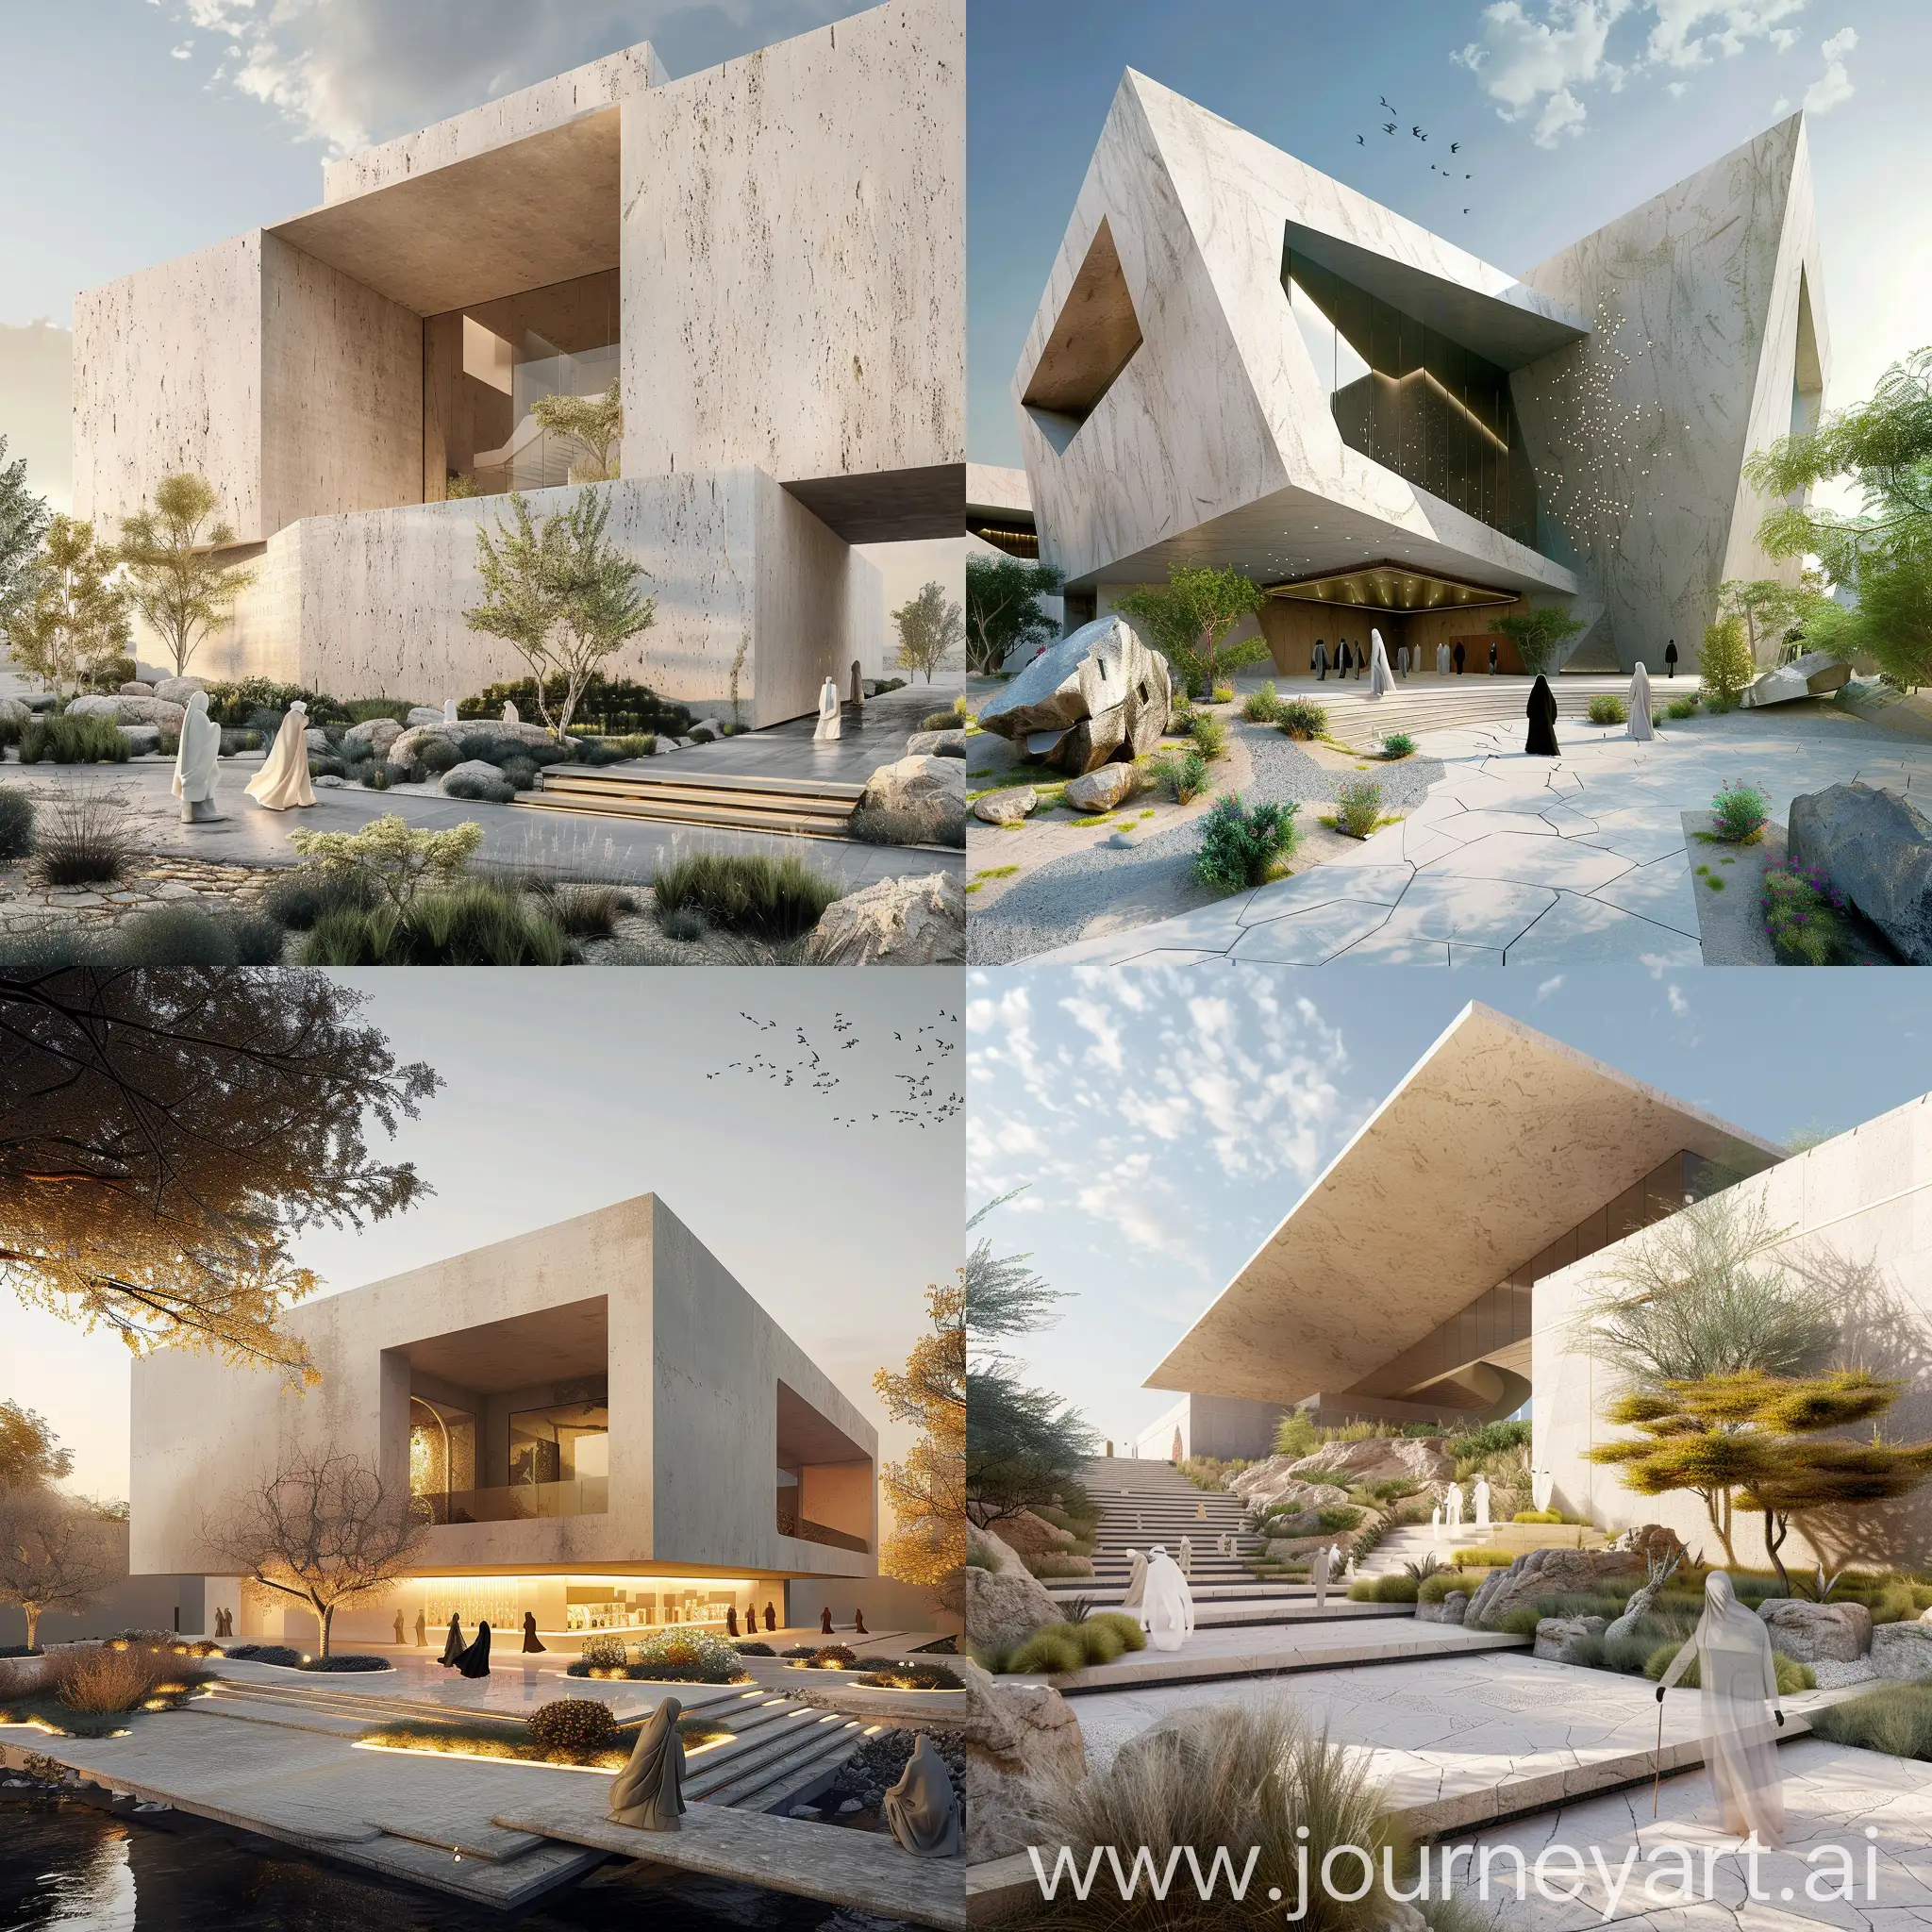 Hyper-Realistic-Modern-Exterior-Design-for-Jewelry-Museum-in-Hijazi-Arabian-Style-with-Interactive-People-and-Landscape